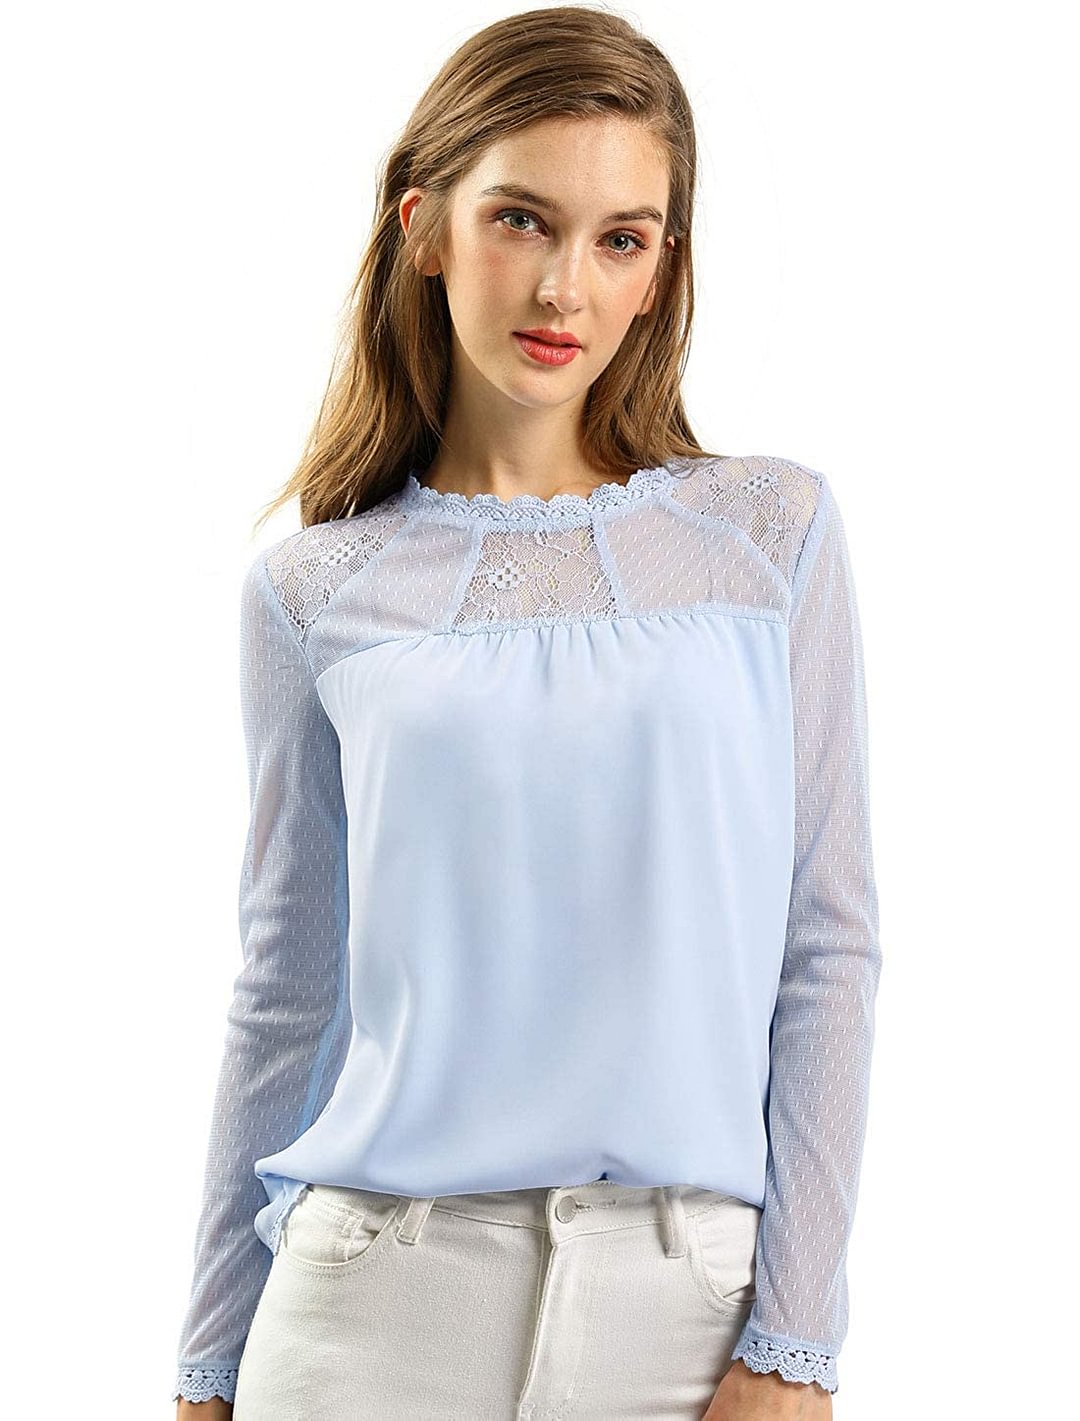 Women's Lace Floral Panel Long Sleeves Peasant Blouse Crew Neck Chiffon Top Shirt